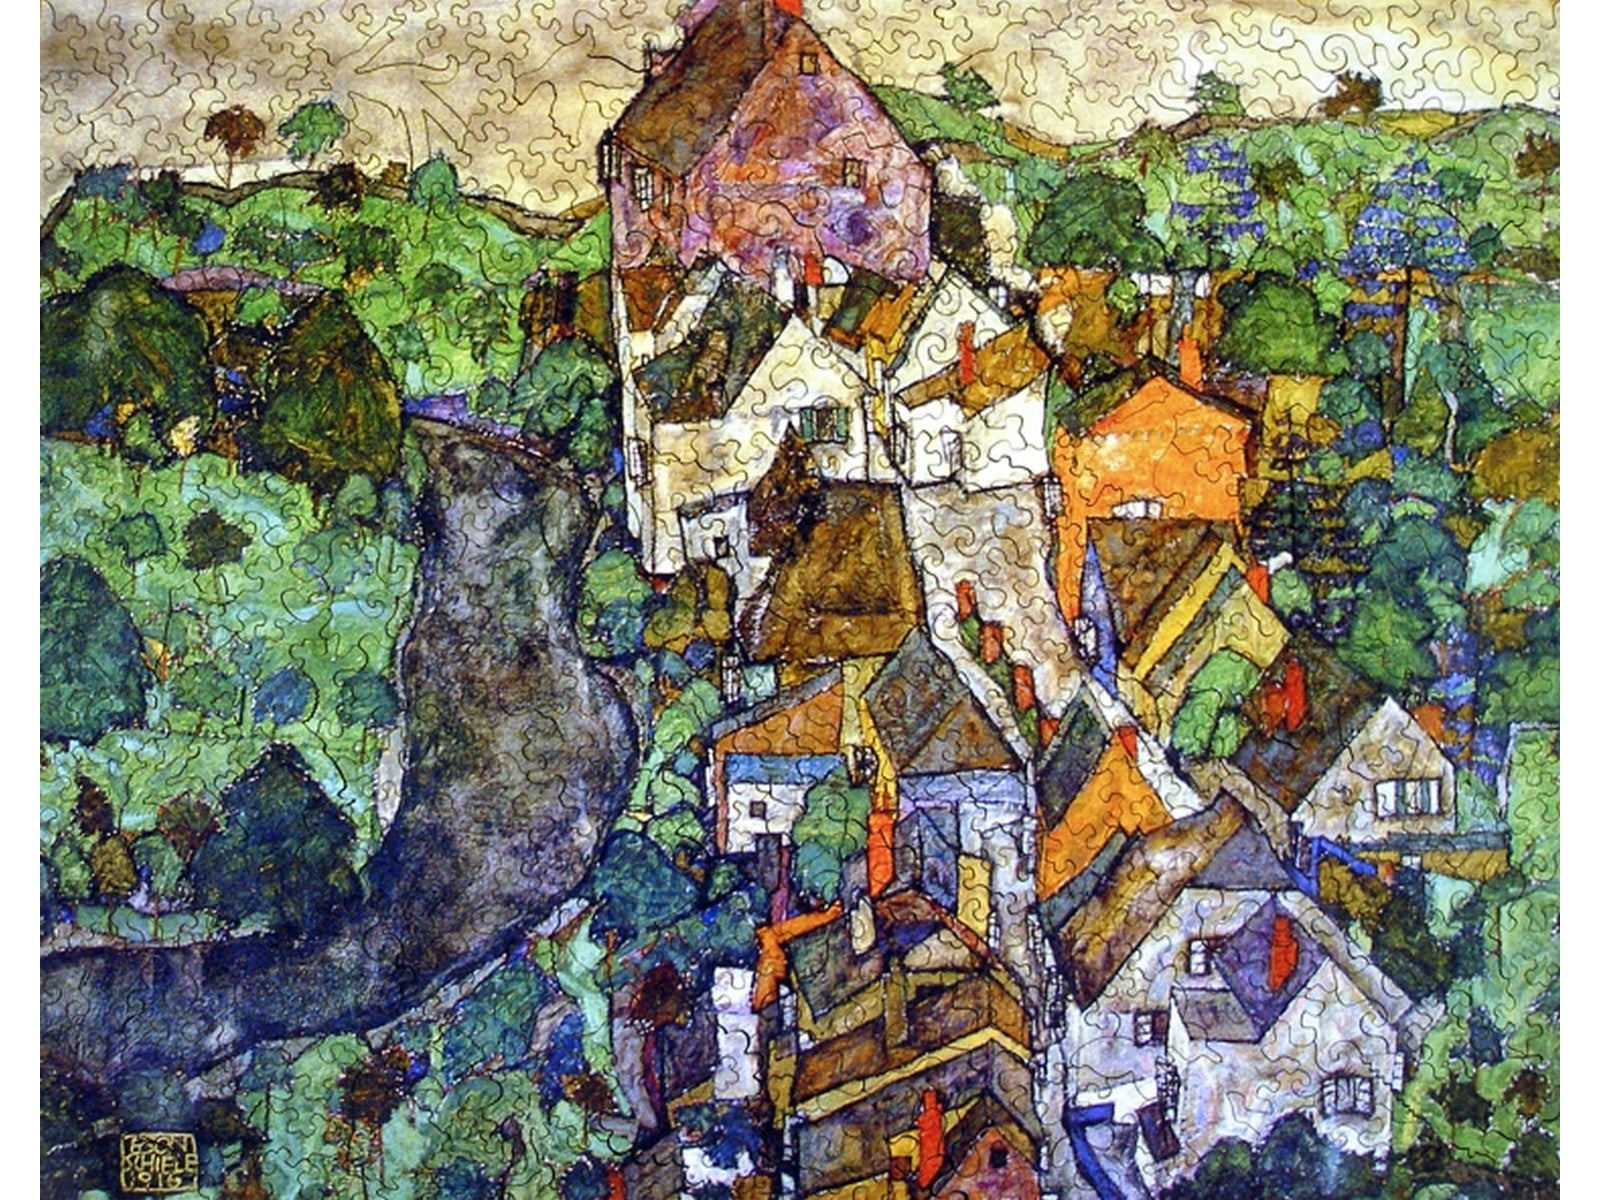 The front of the puzzle, View of Krumau, which shows a small village in the countryside.